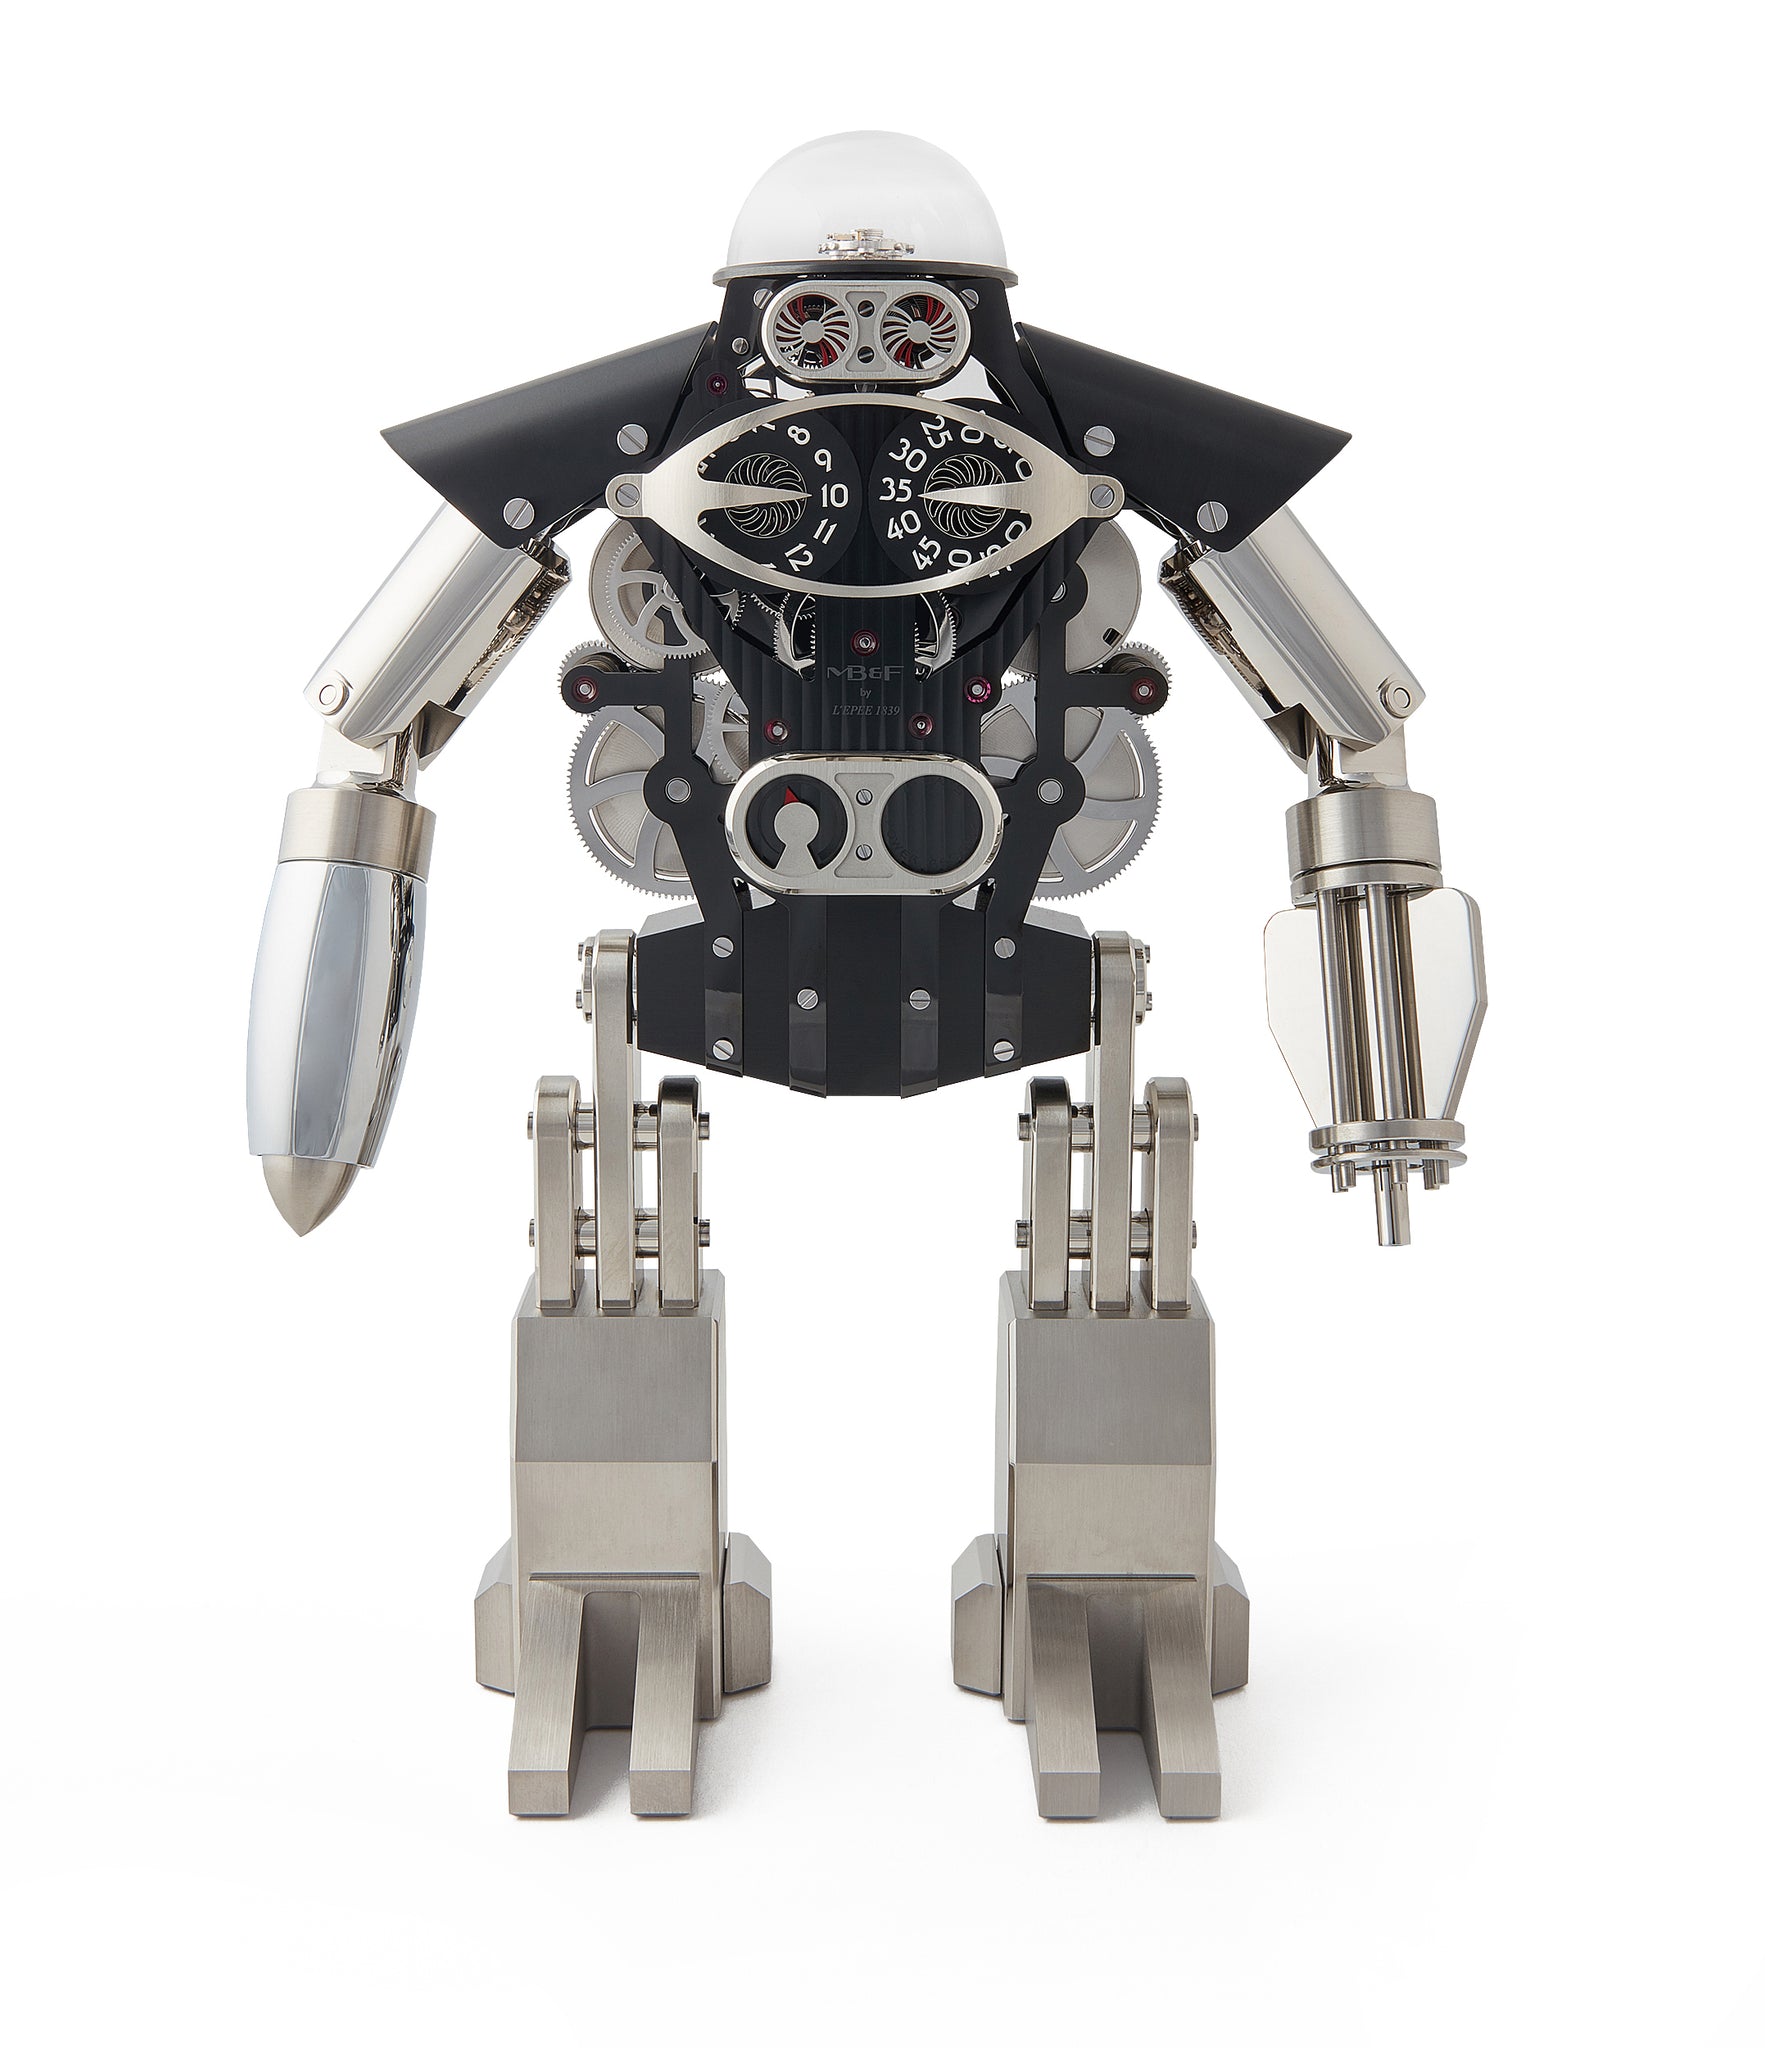 buy MB&F Melchio L'Epee "Dark" roboclock robotic desk clock for sale online at A Collected Man London